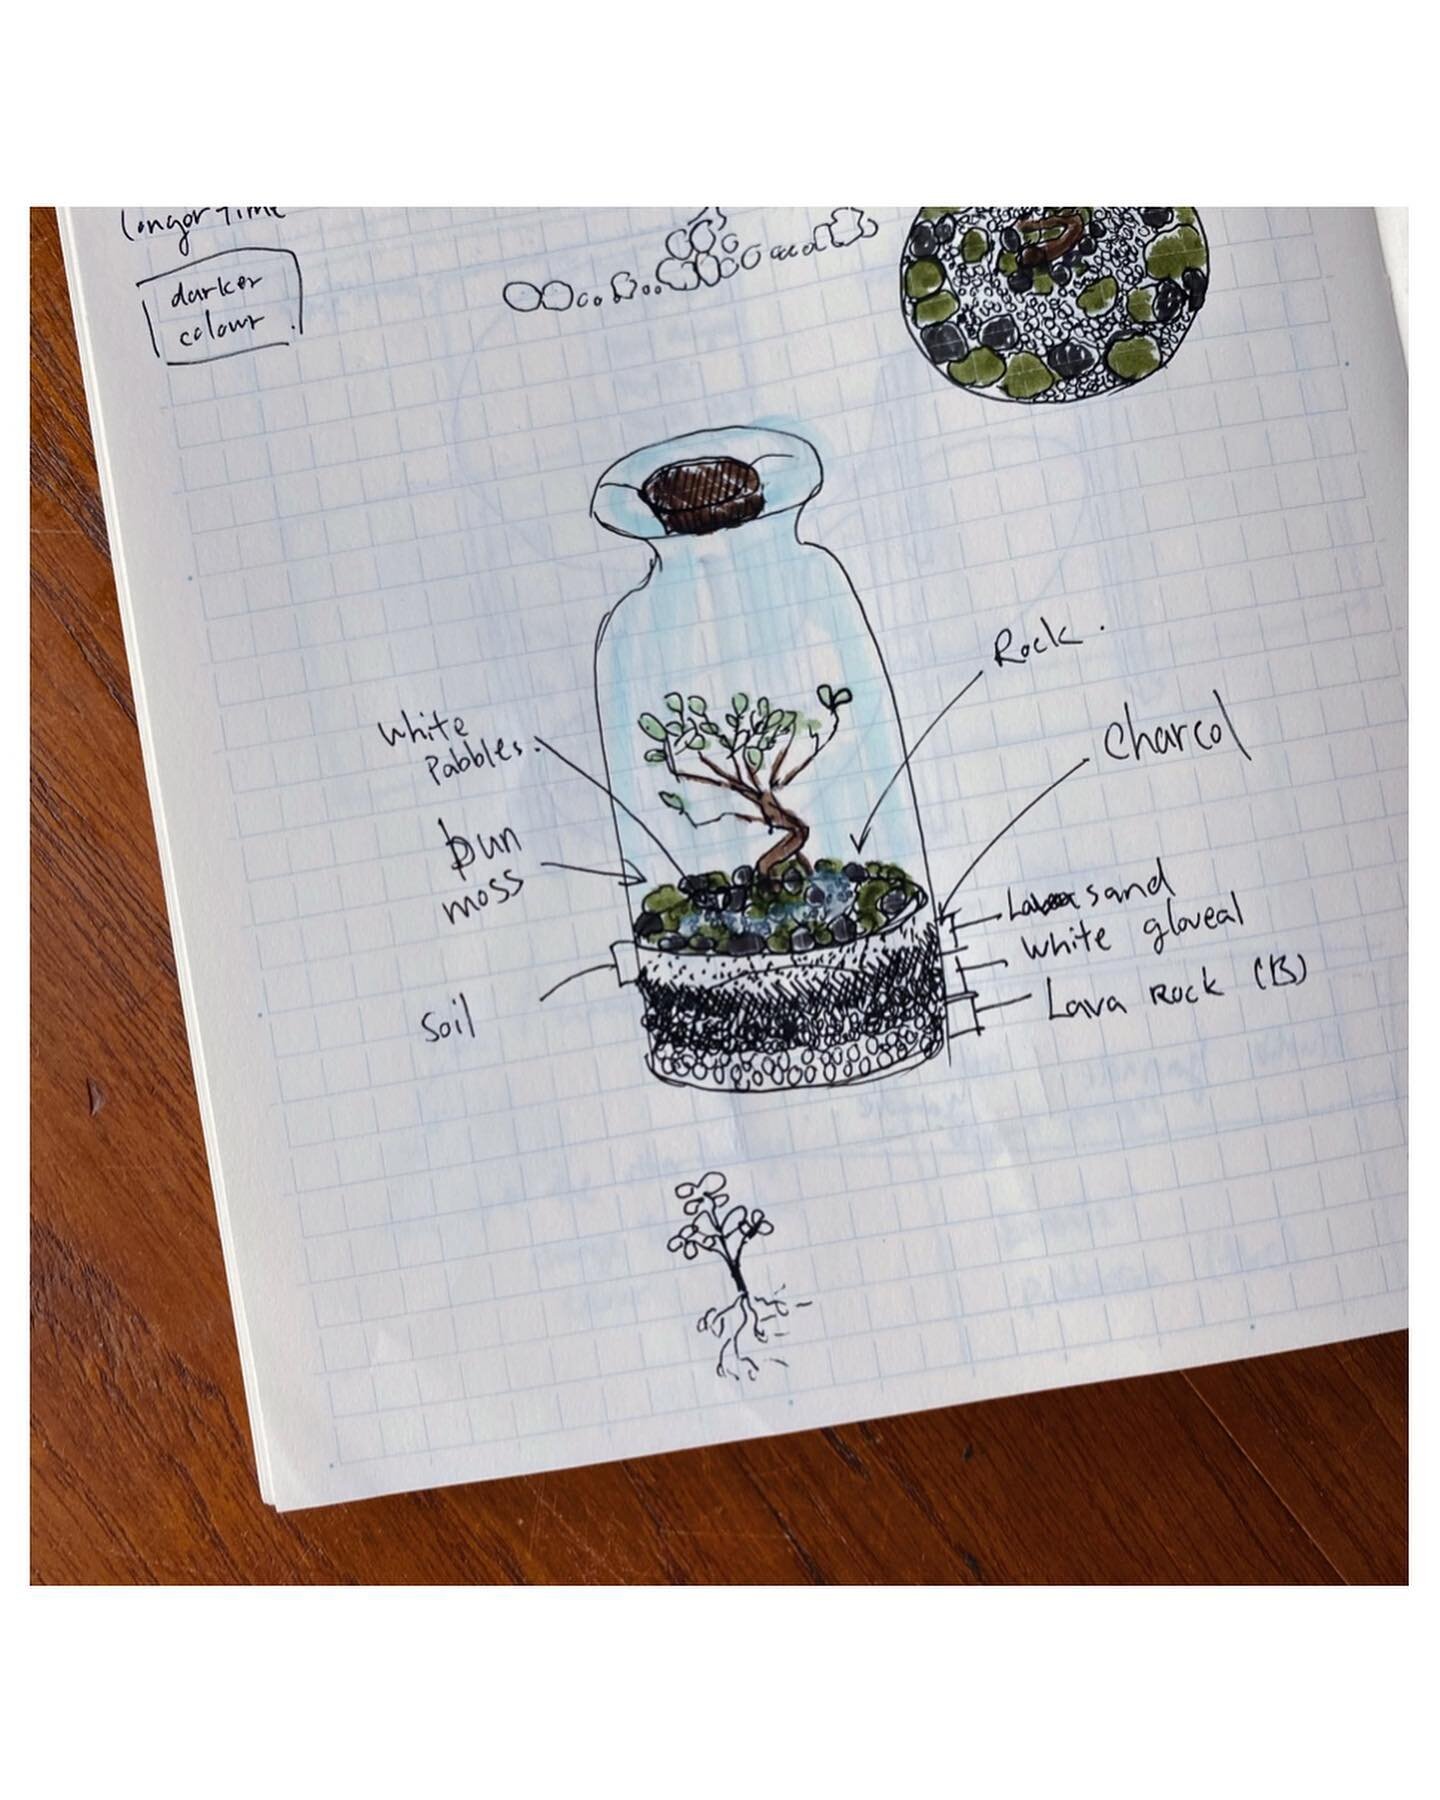 This is a zen garden inspired terrarium in side a jar. Zen garden embraces the idea of remaining the same throughout seasons. To achieve that, it uses sand and rock to represent waves and mountain. Moreover, when it comes to choices of plant, it tend